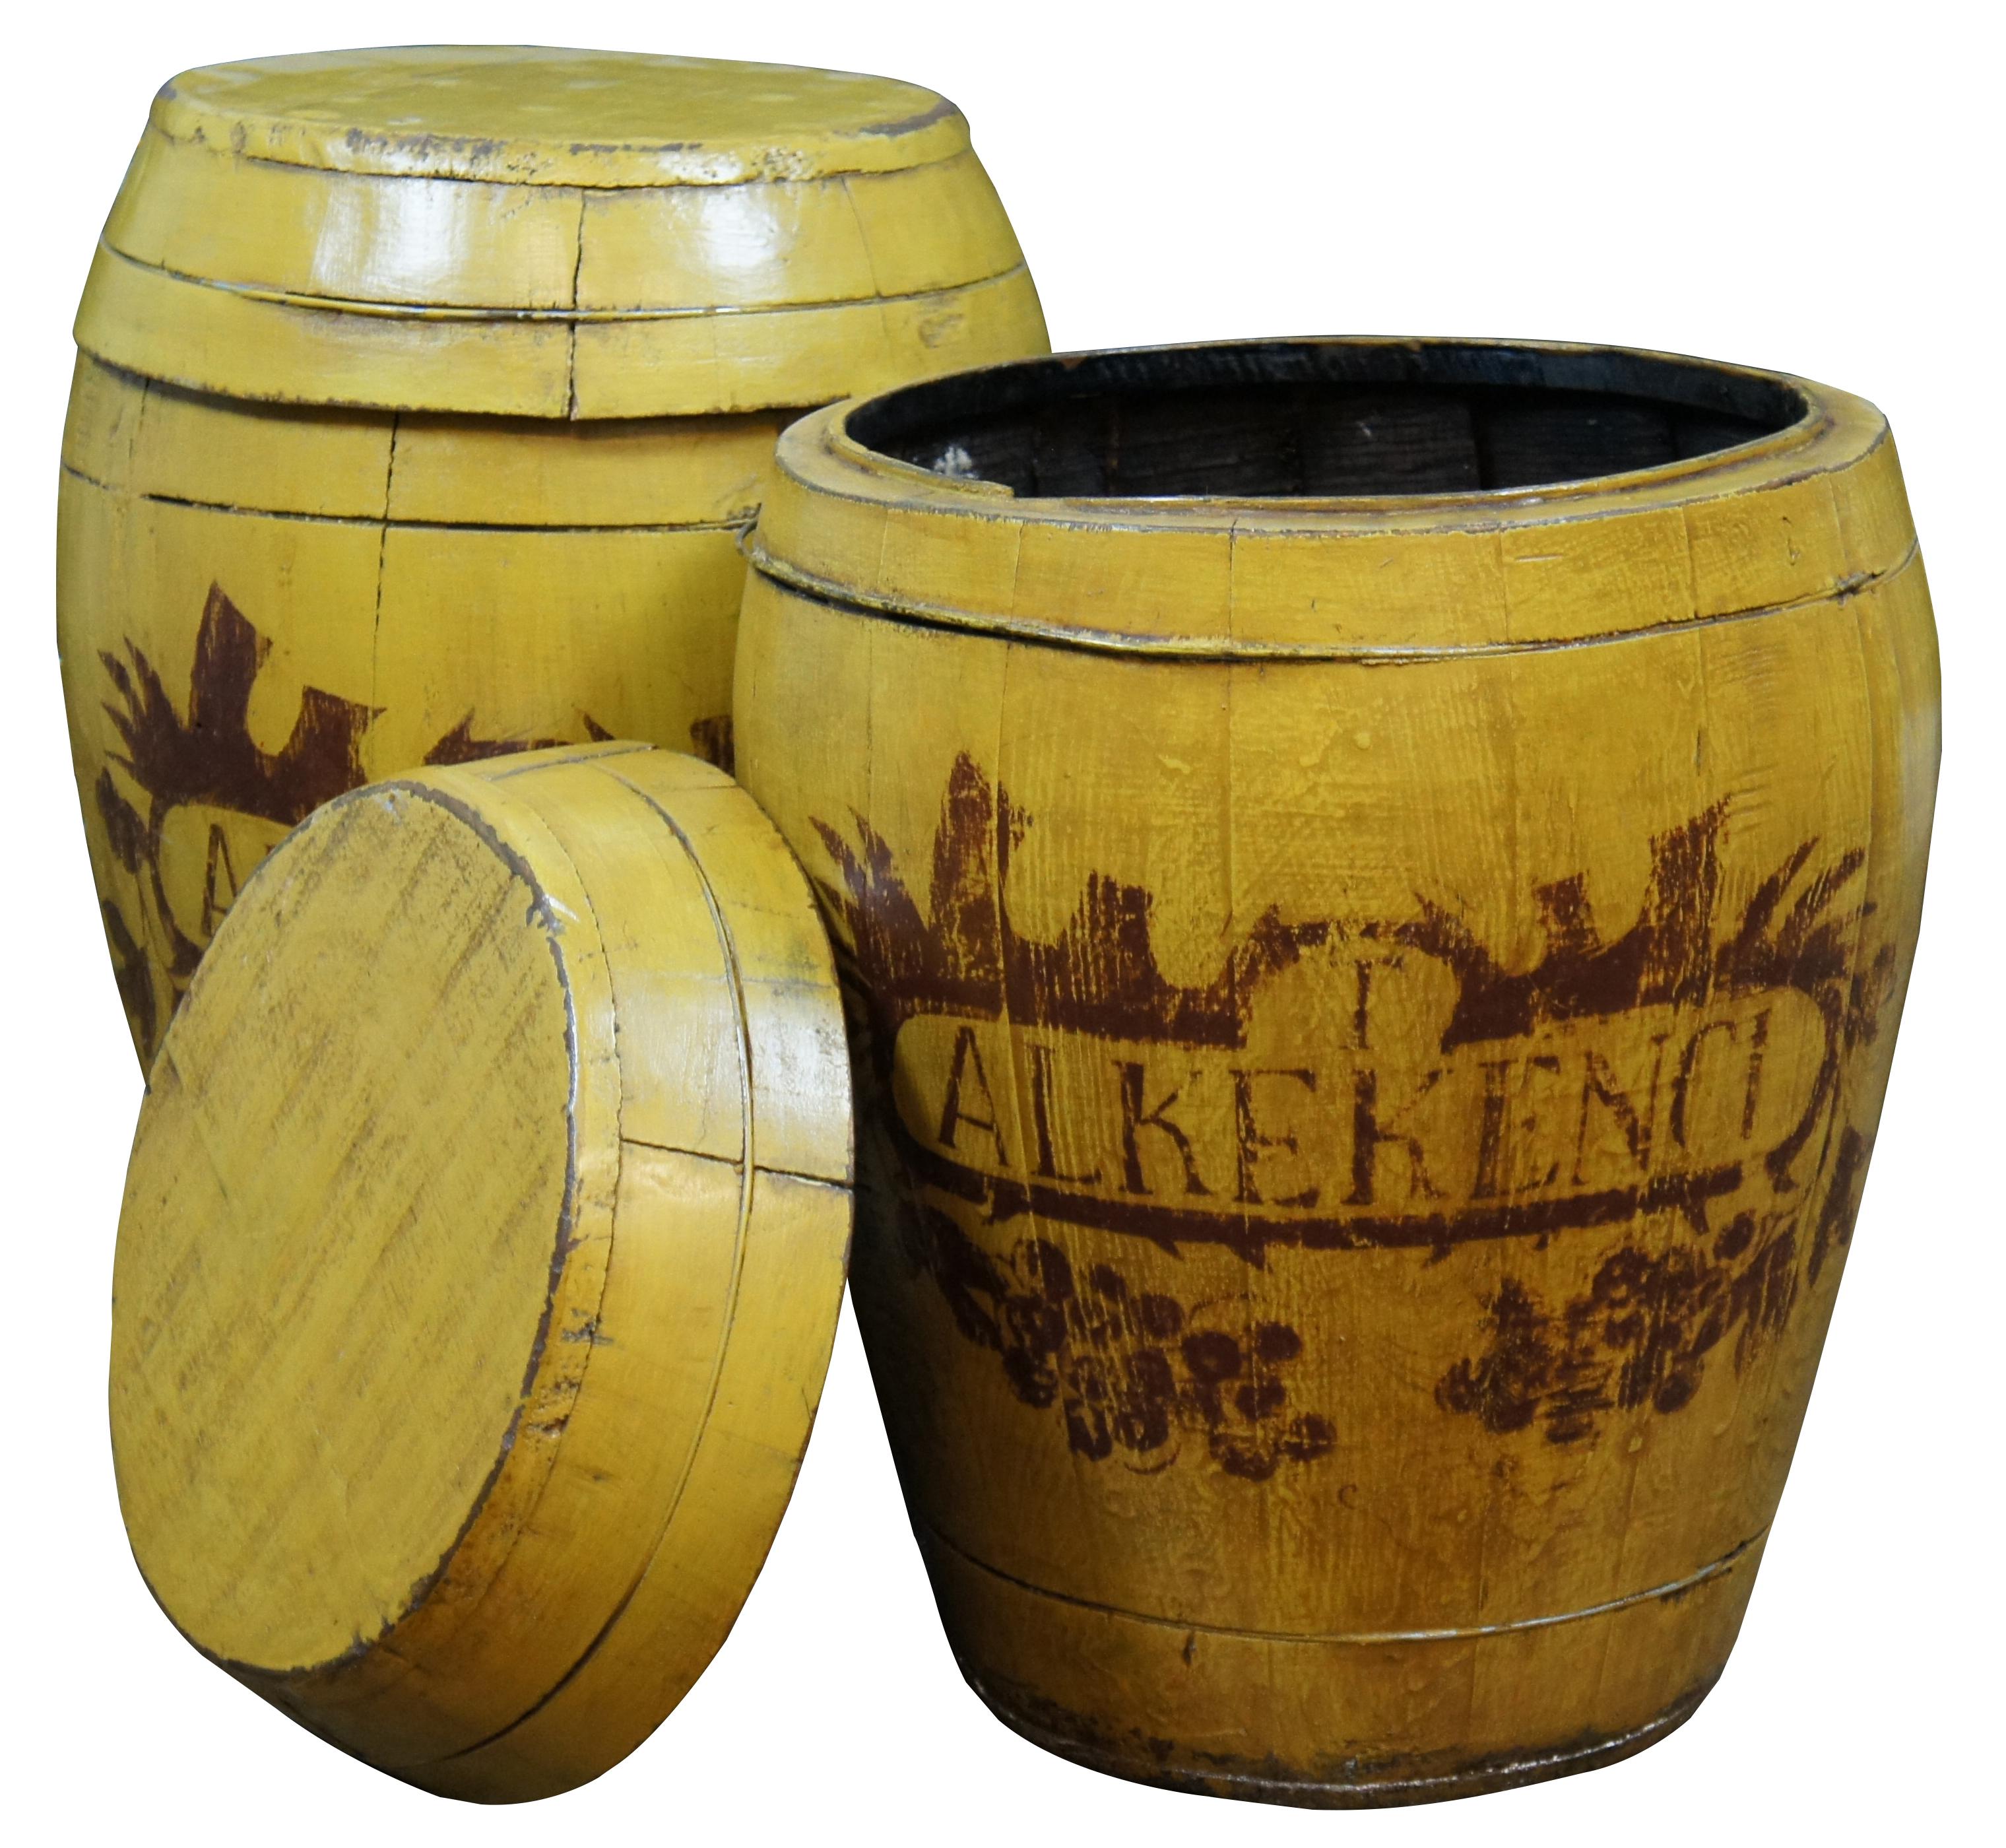 Antique wooden barrel shaped containers / jars / end tables or stands painted yellow and stenciled with the word Alkekenci (alkekengi – the winter cherry / strawberry groundcherry) surrounded by a grape vine. Size: 18